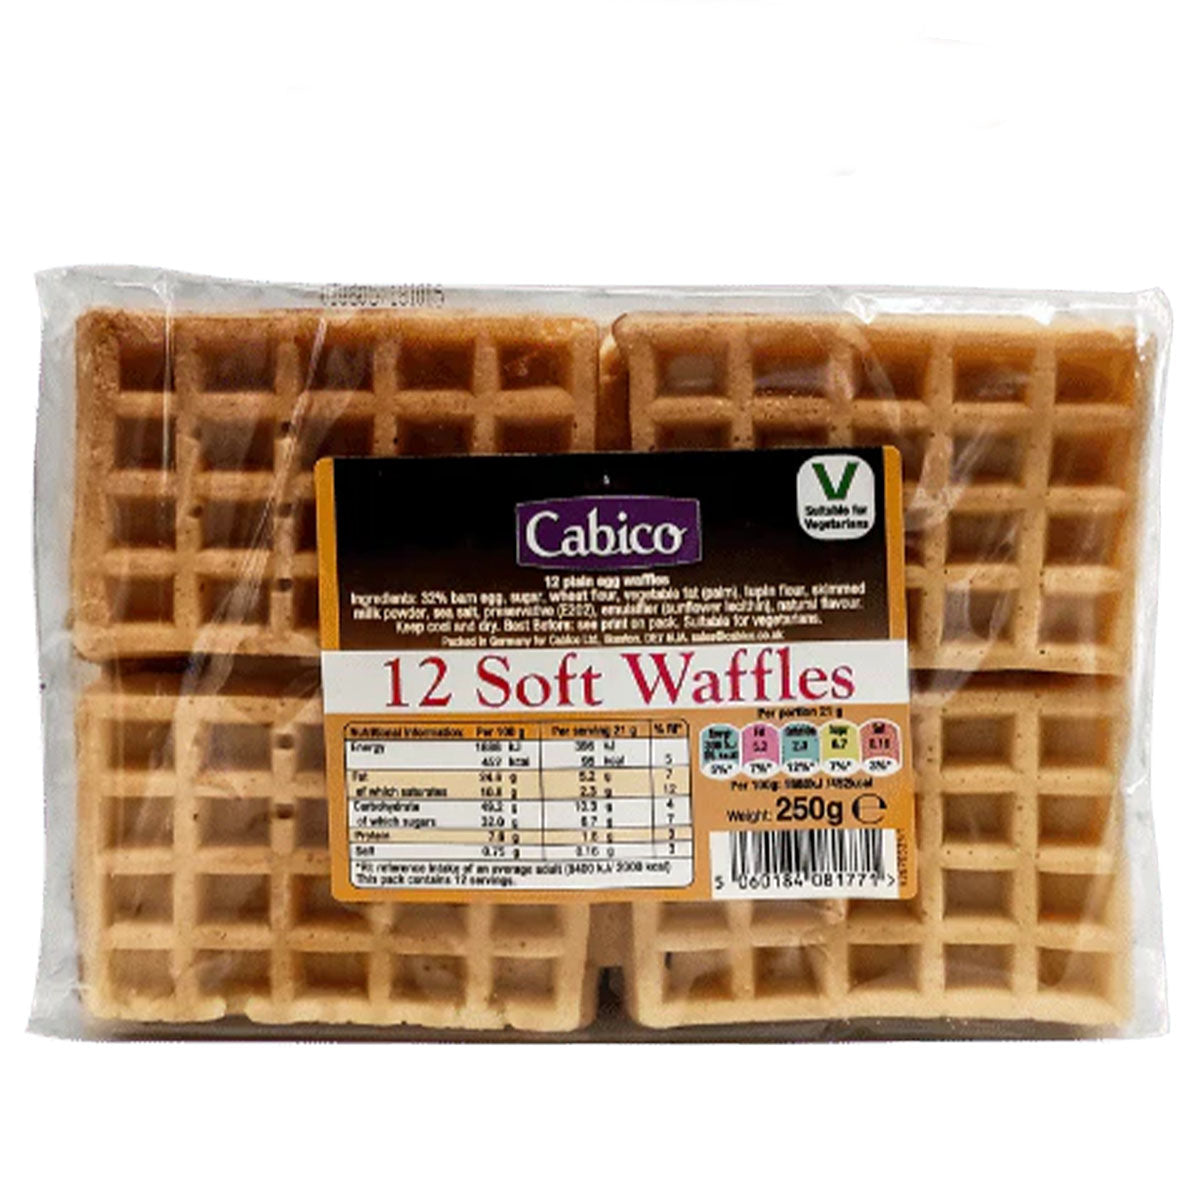 Cabico - Soft Waffles - 250g - Continental Food Store